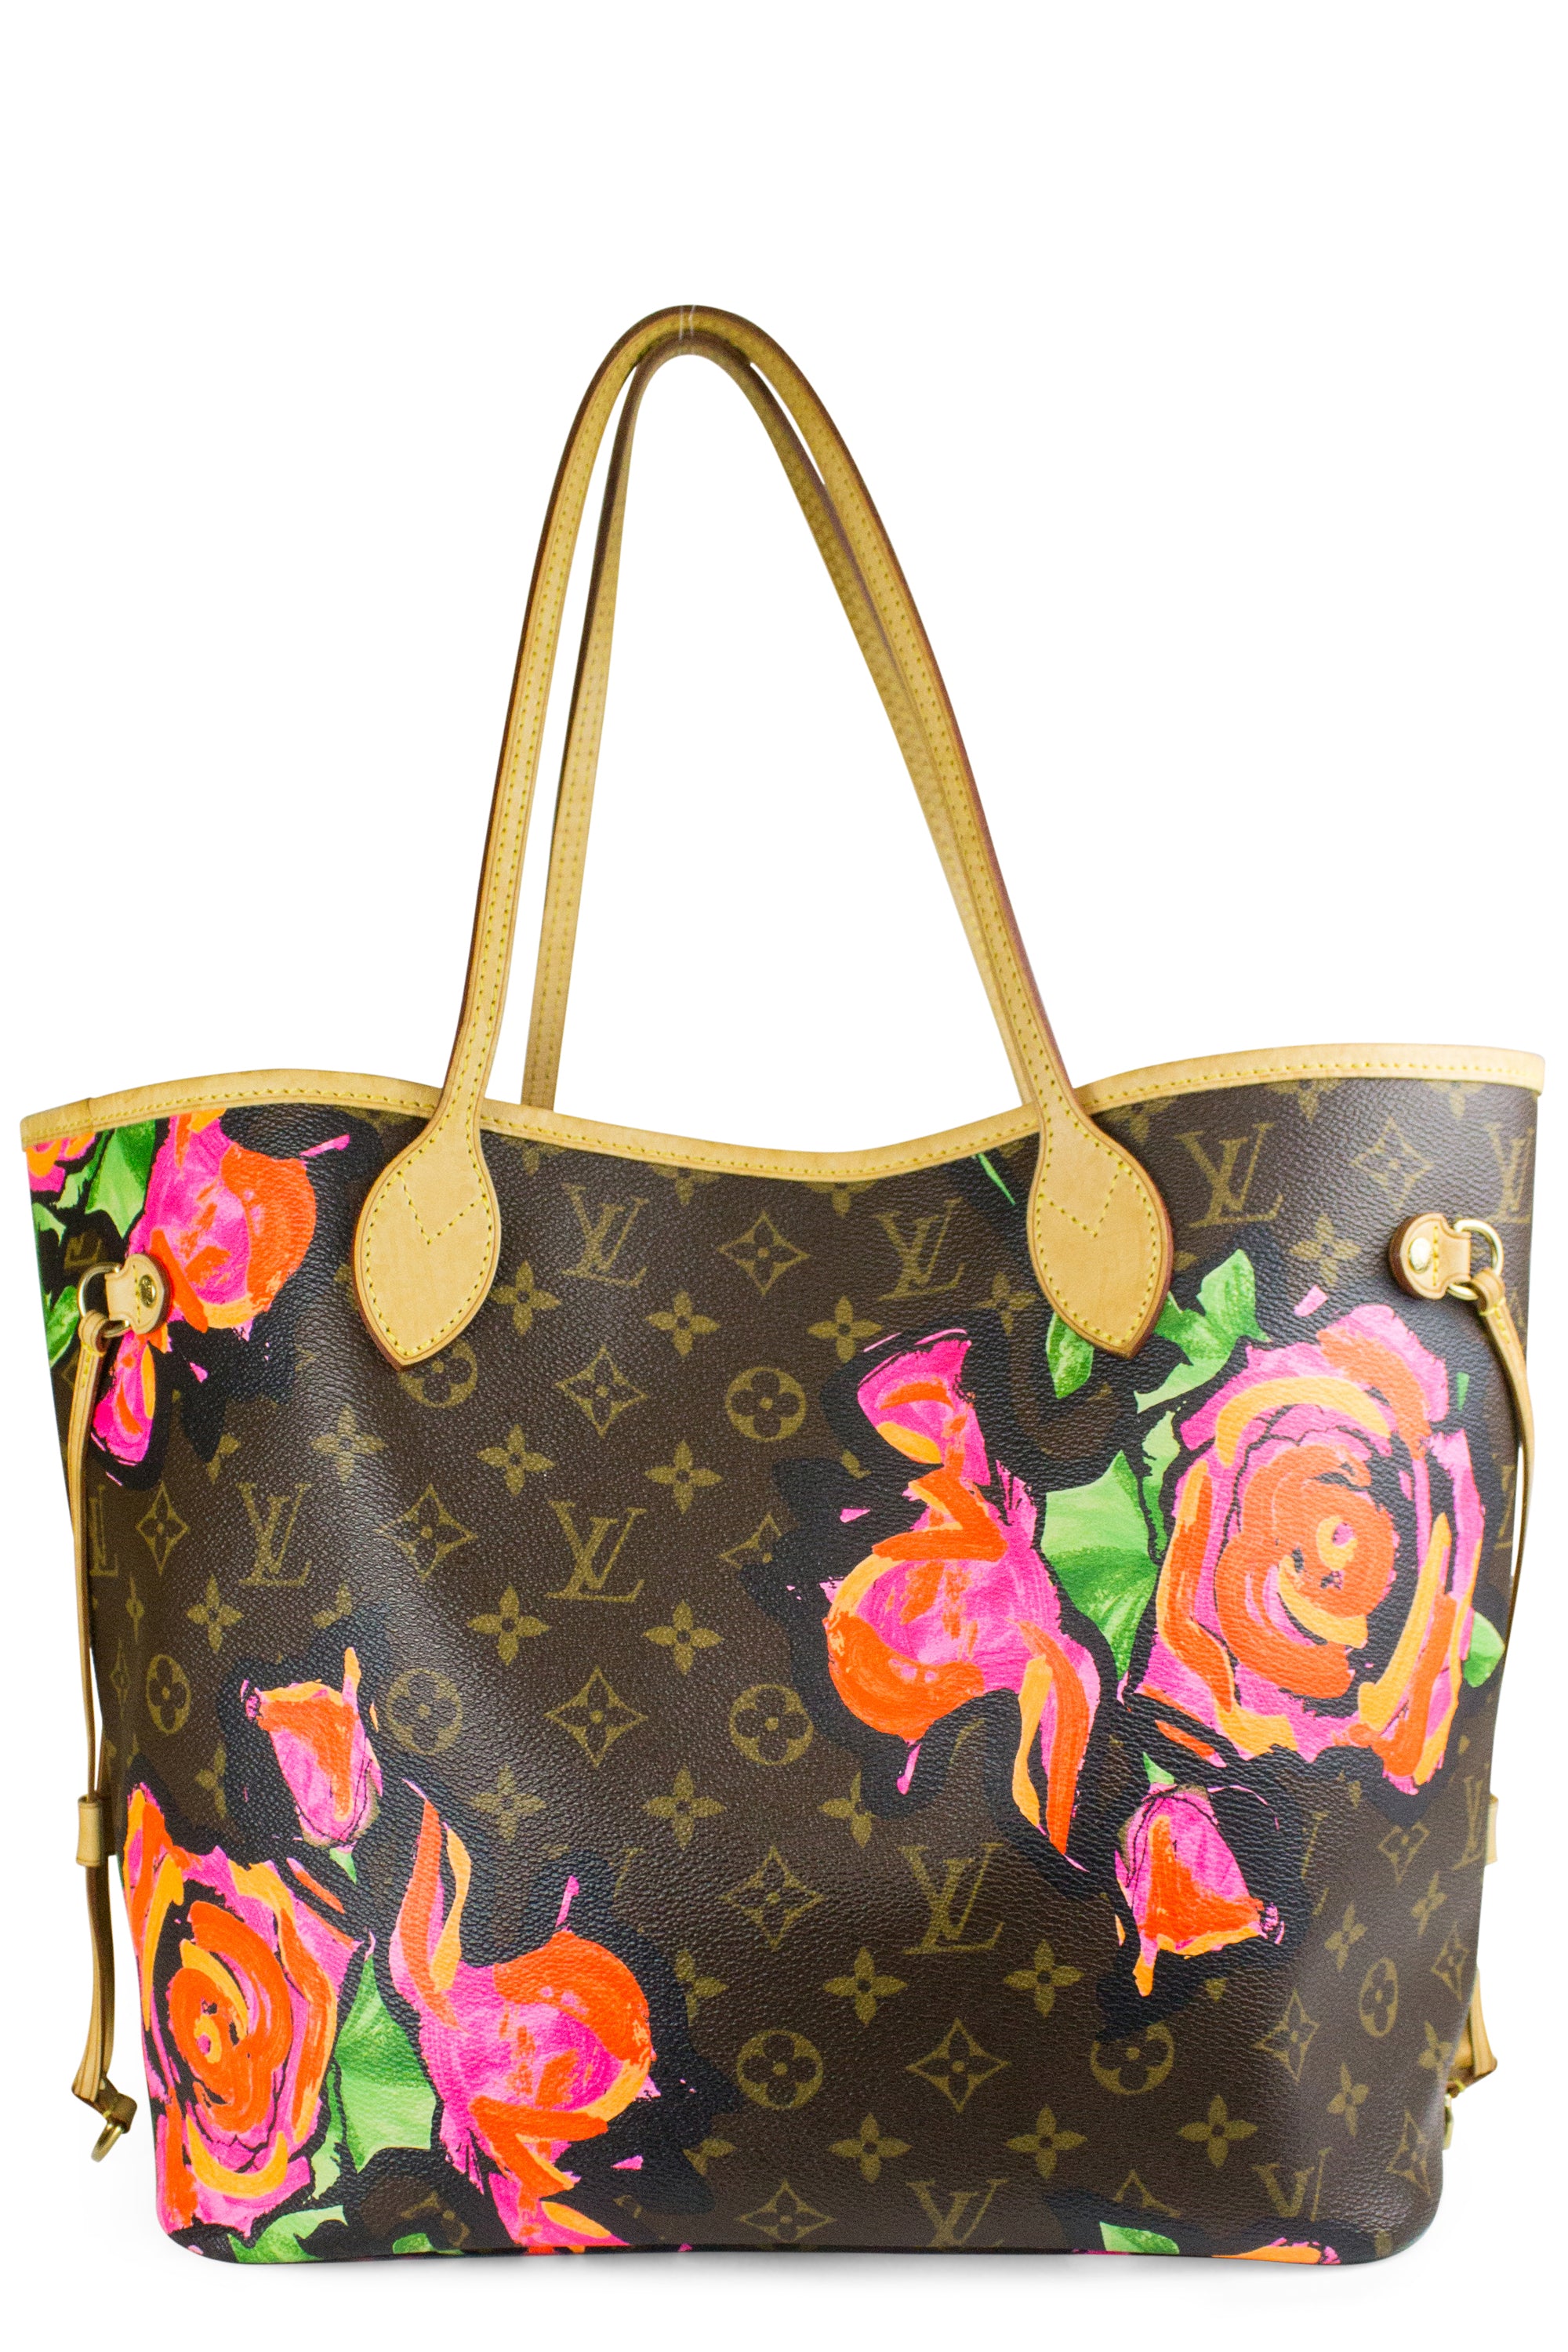 LOUIS VUITTON Stephen Sprouse Limited Edition Neverfull – REAWAKE